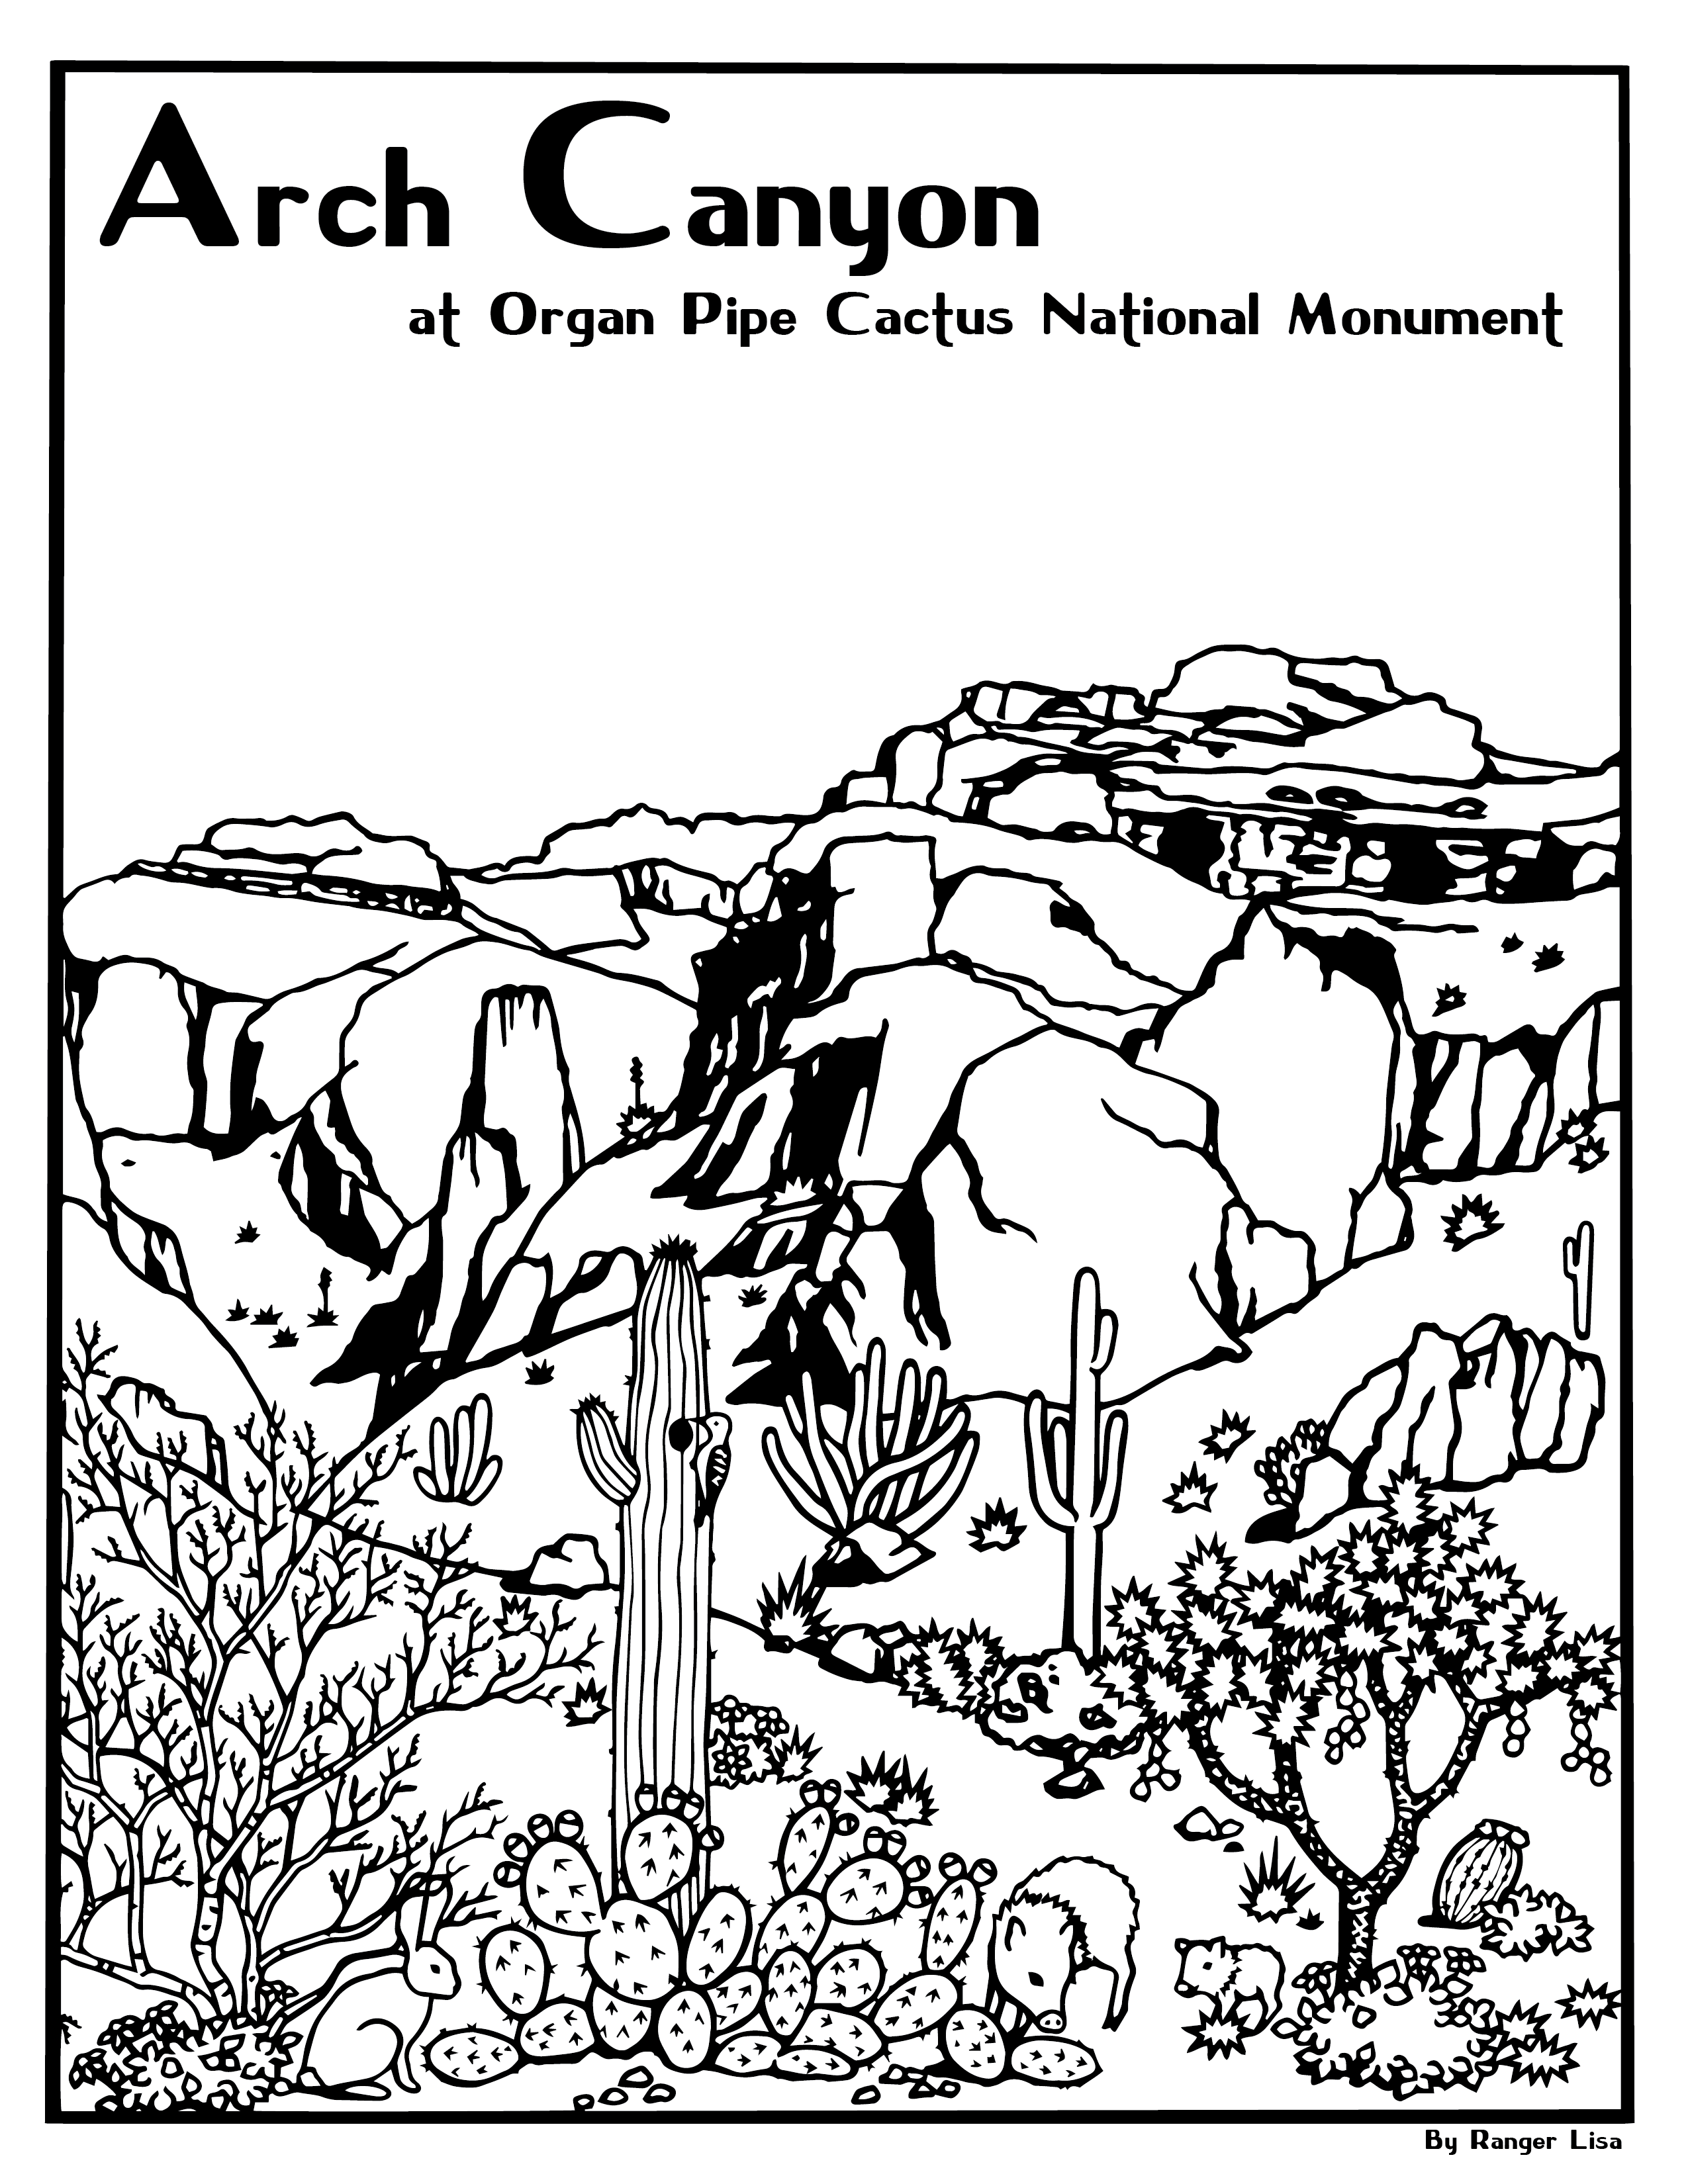 Coloring page of a desert canyon with the text "Arch Canyon at Organ Pipe Cactus National Monument."